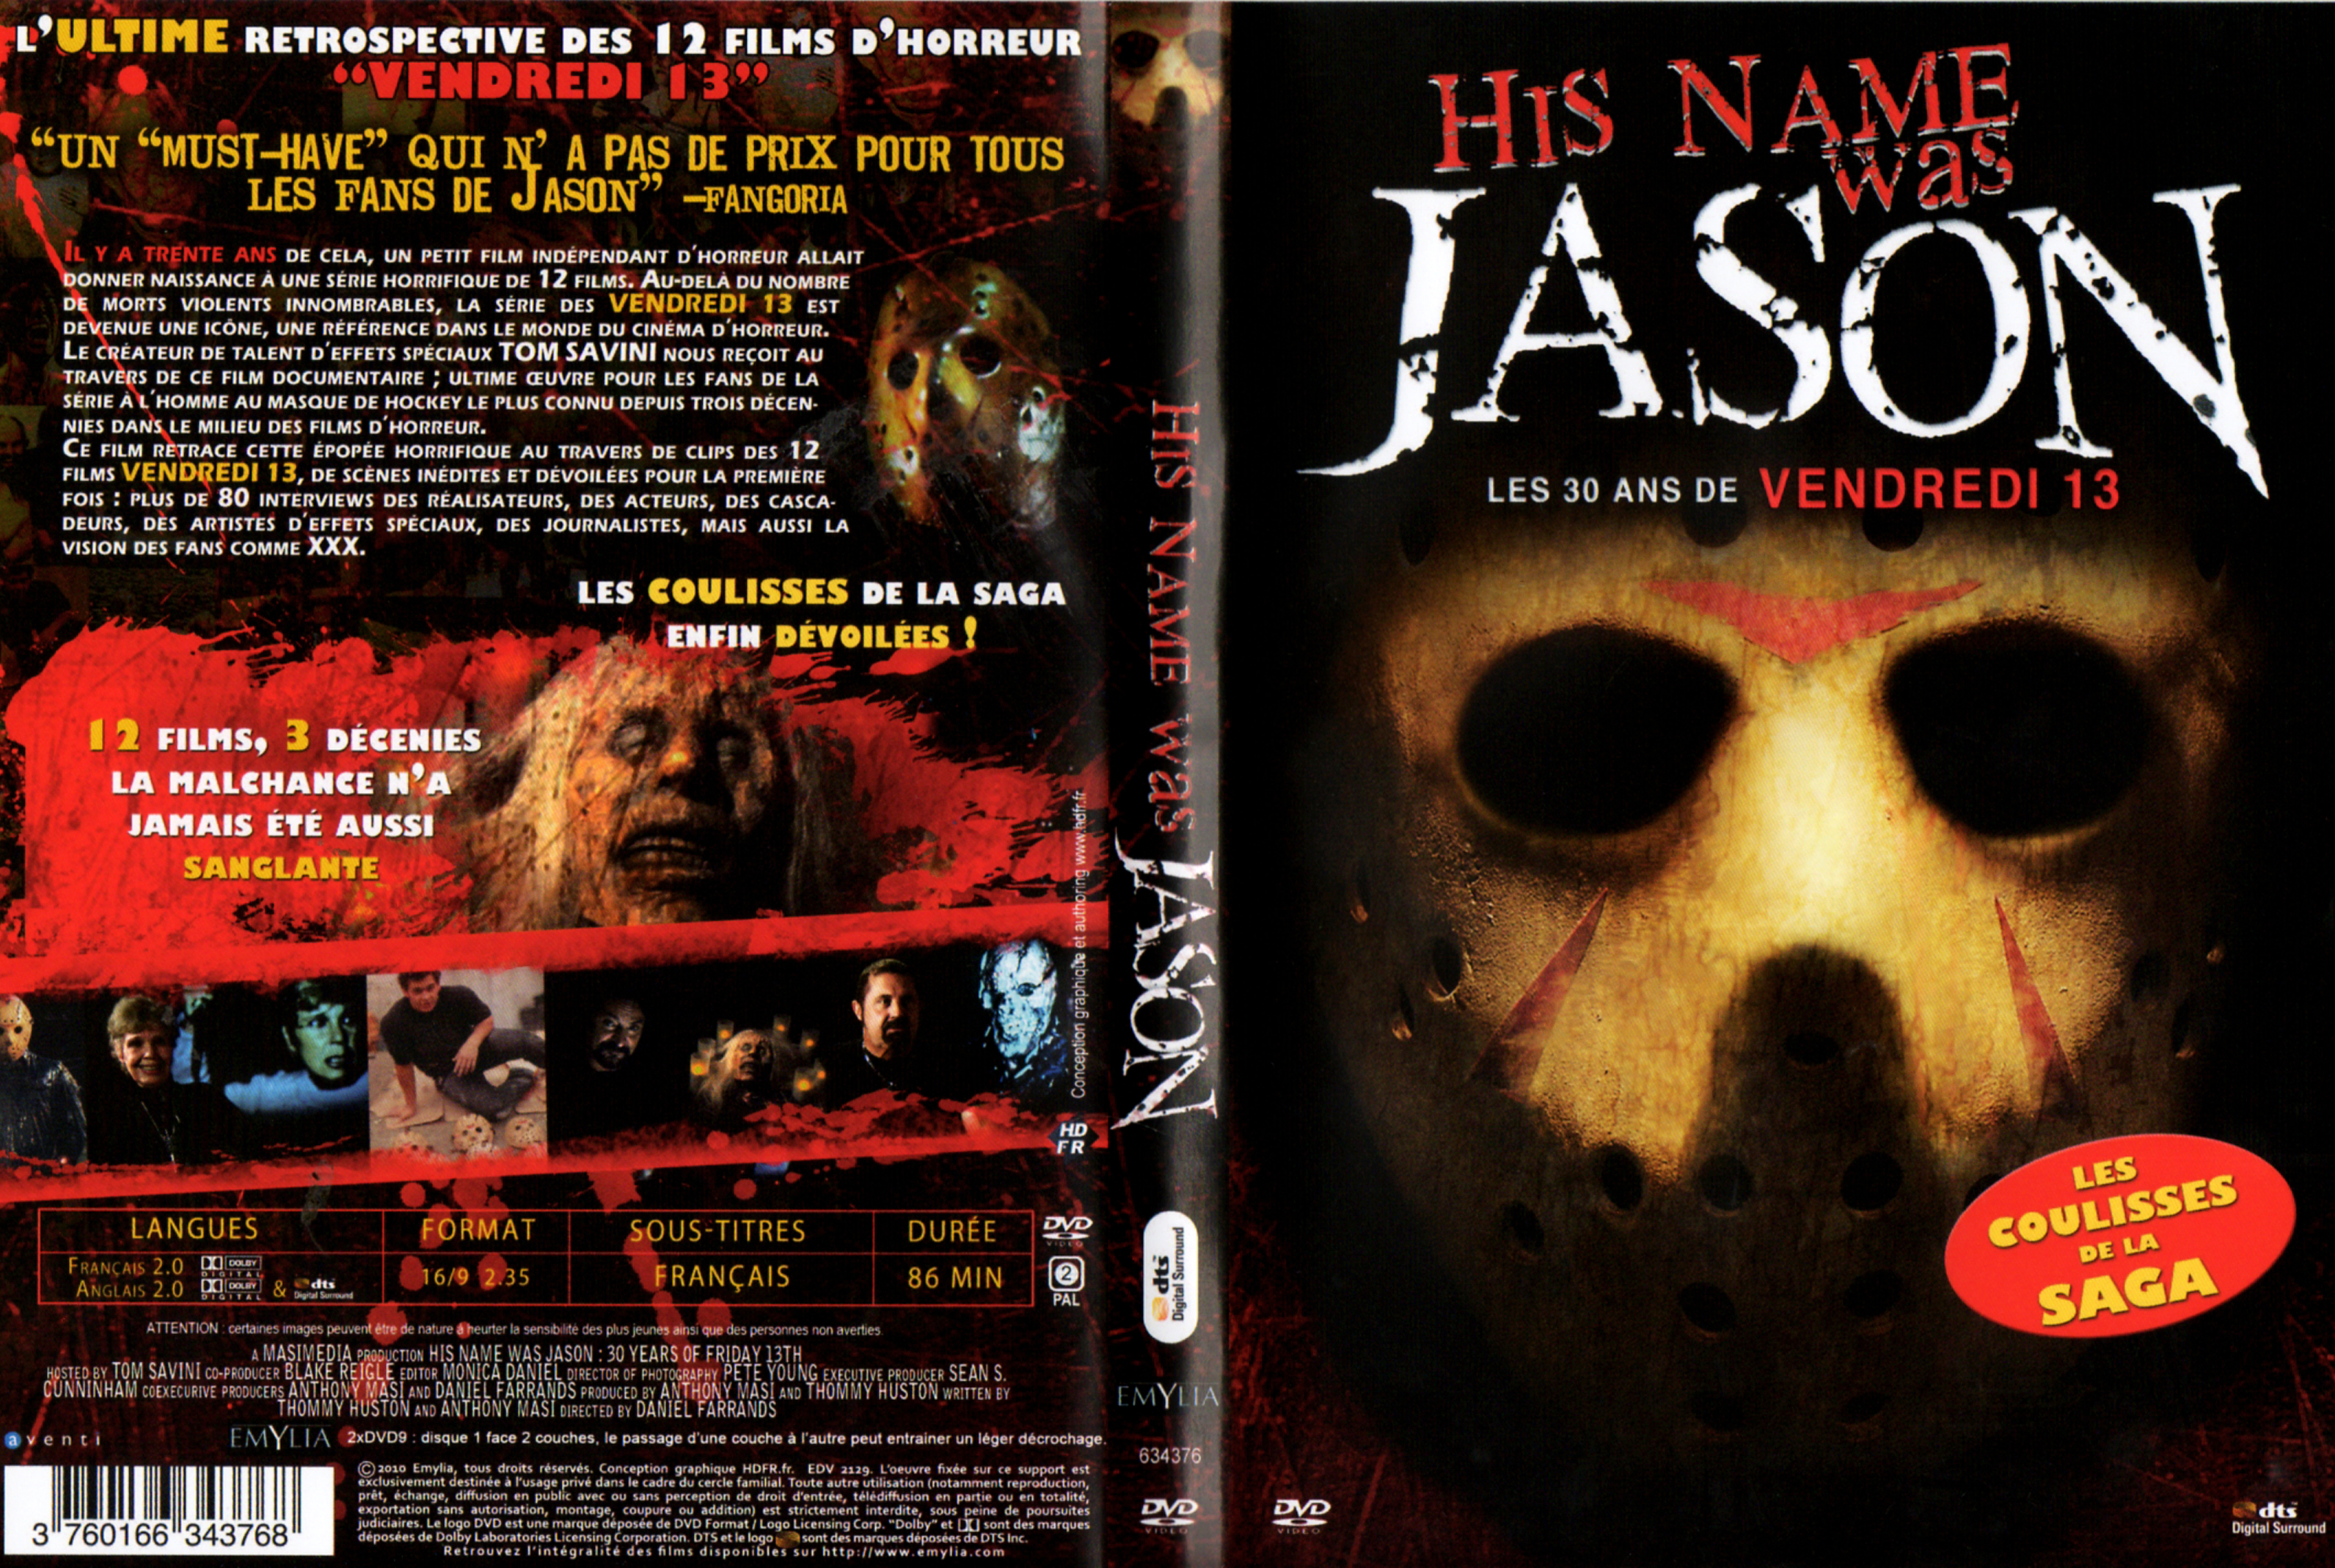 Jaquette DVD His name was Jason